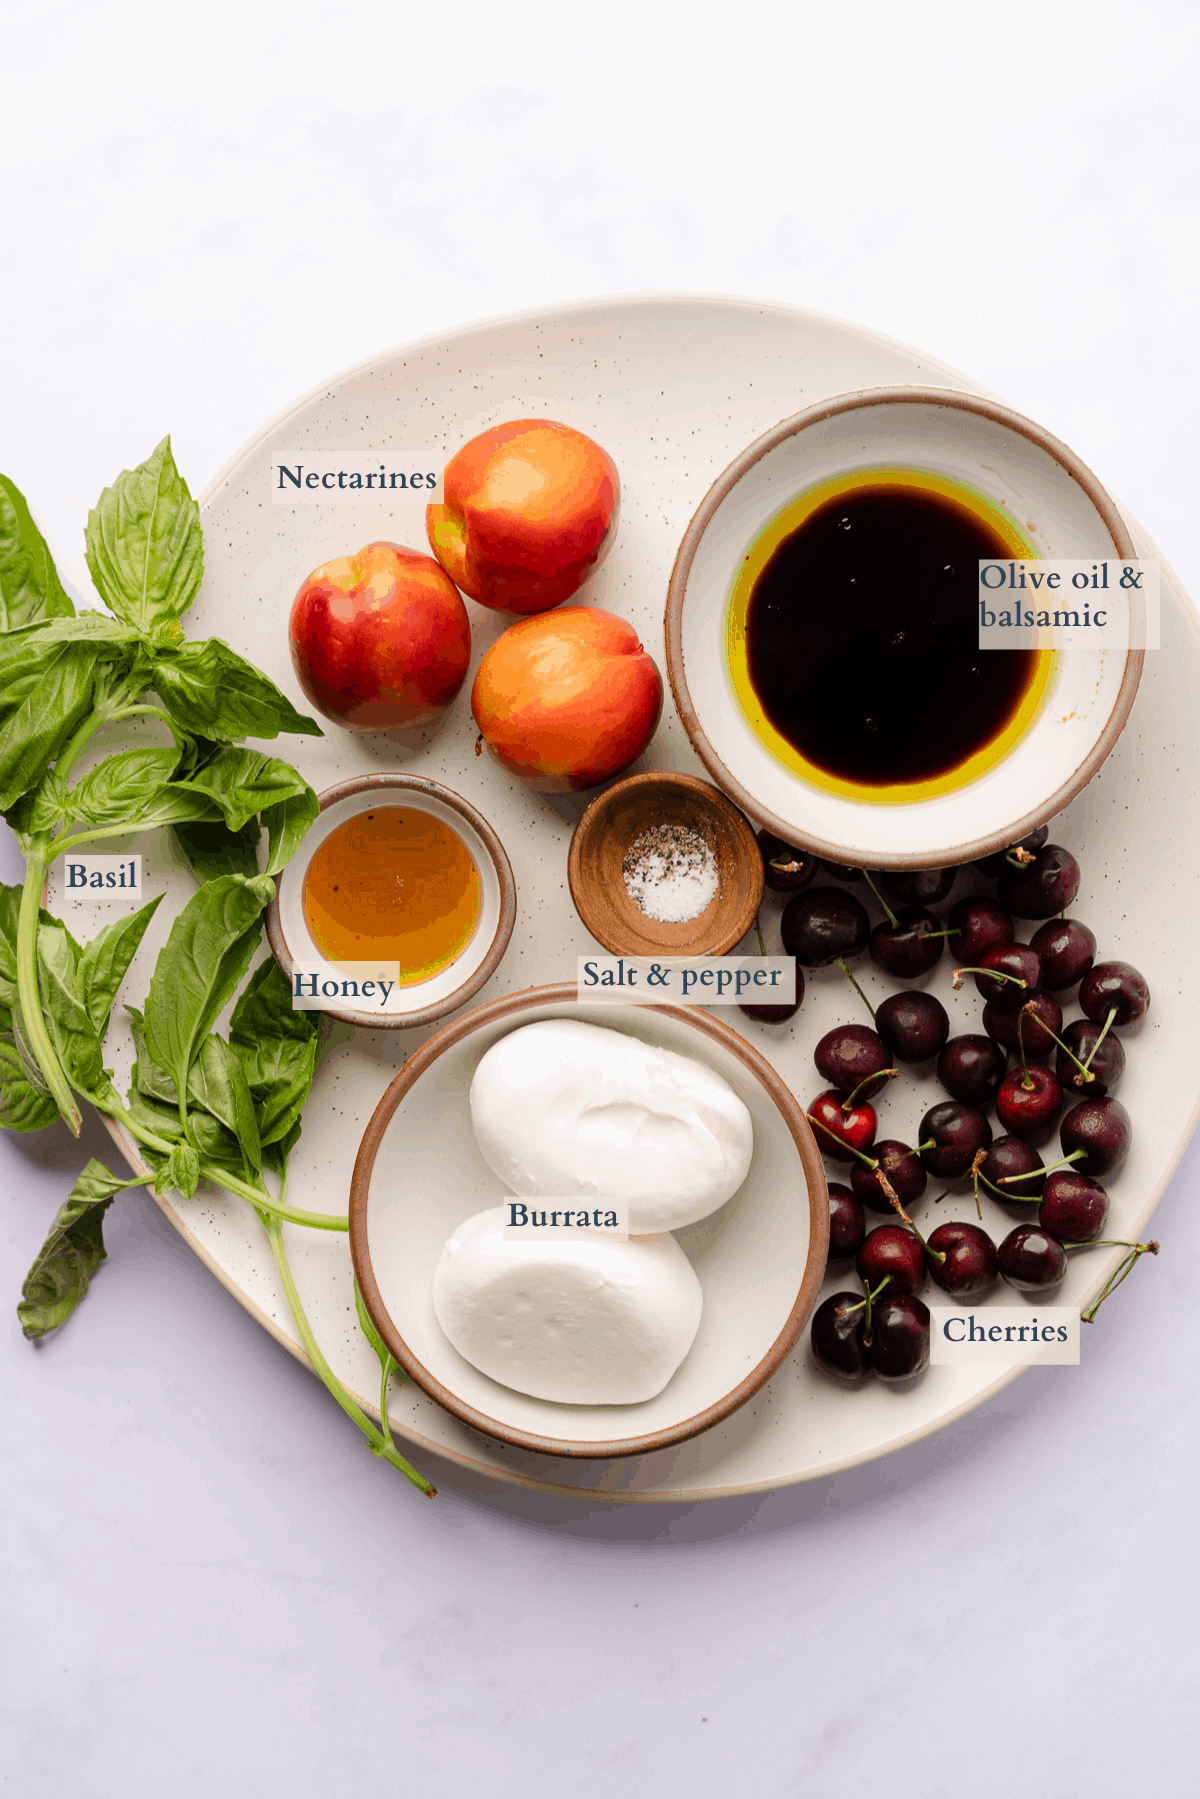 Roasted Nectarines and Cherries with Burrata Ingredients Graphic with text to denote the different ingredients